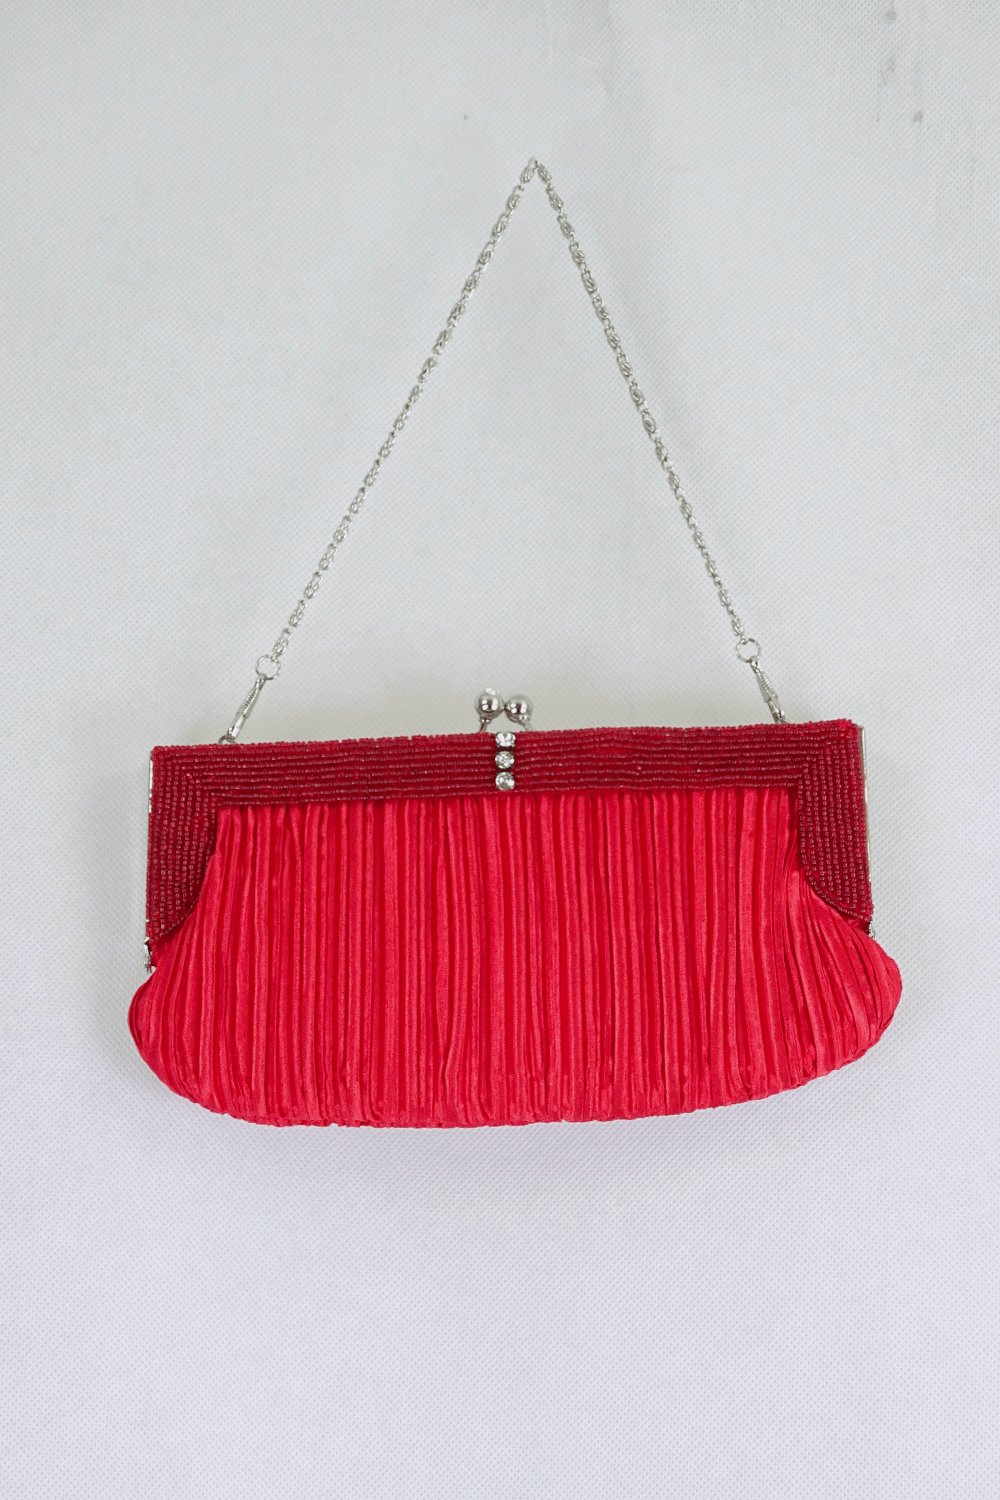 Red Clutch With Beads